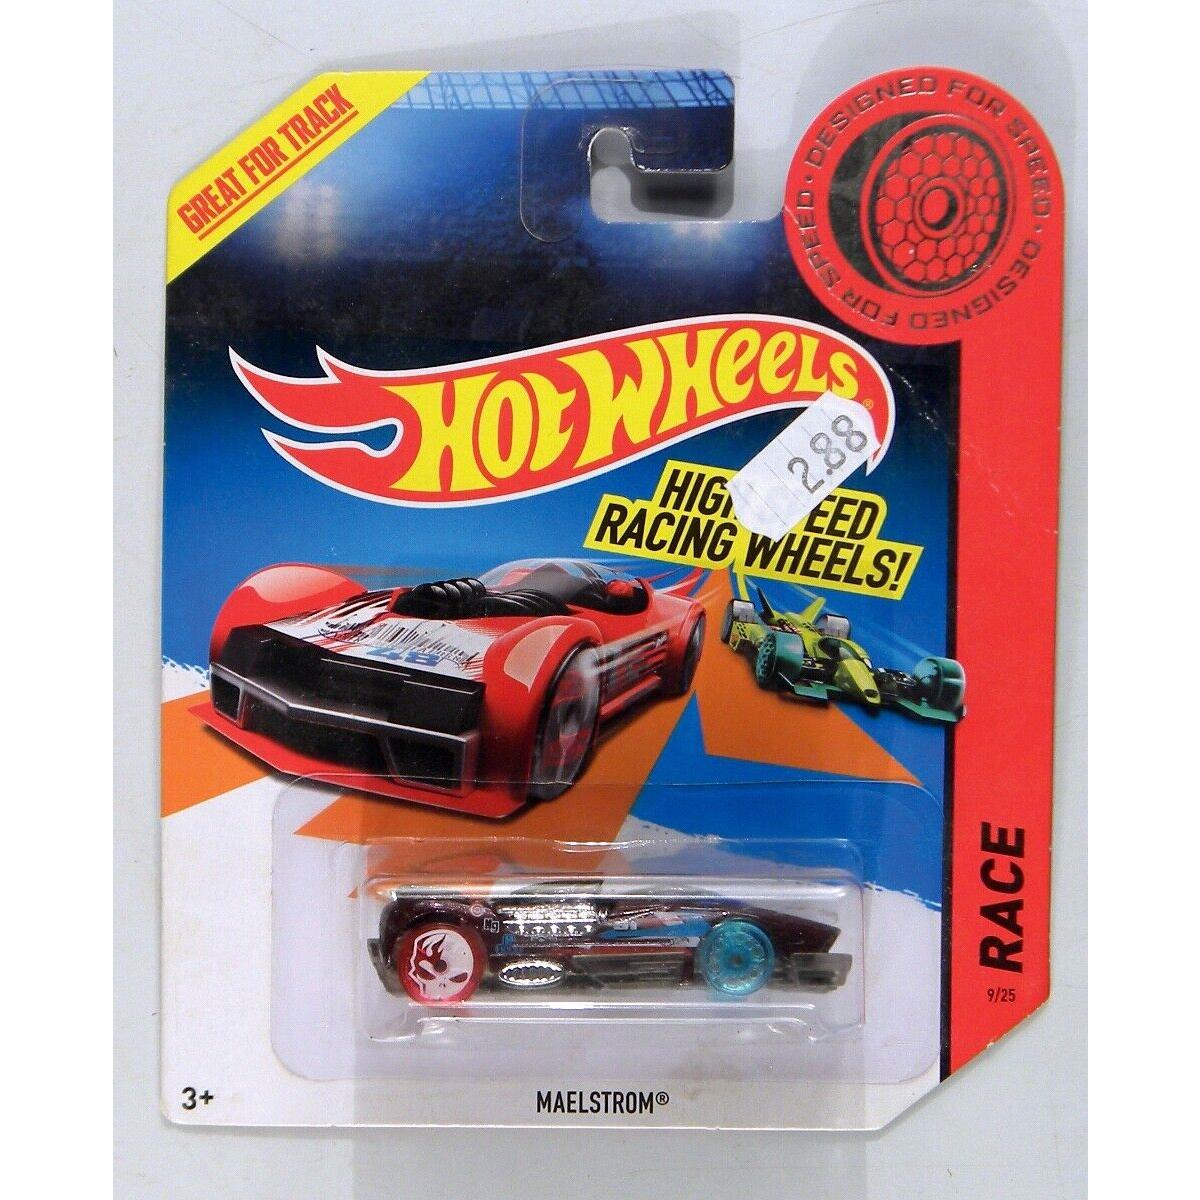 2013 Hot Wheels High Speed Wheels Track Aces Maelstrom Designed For Speed